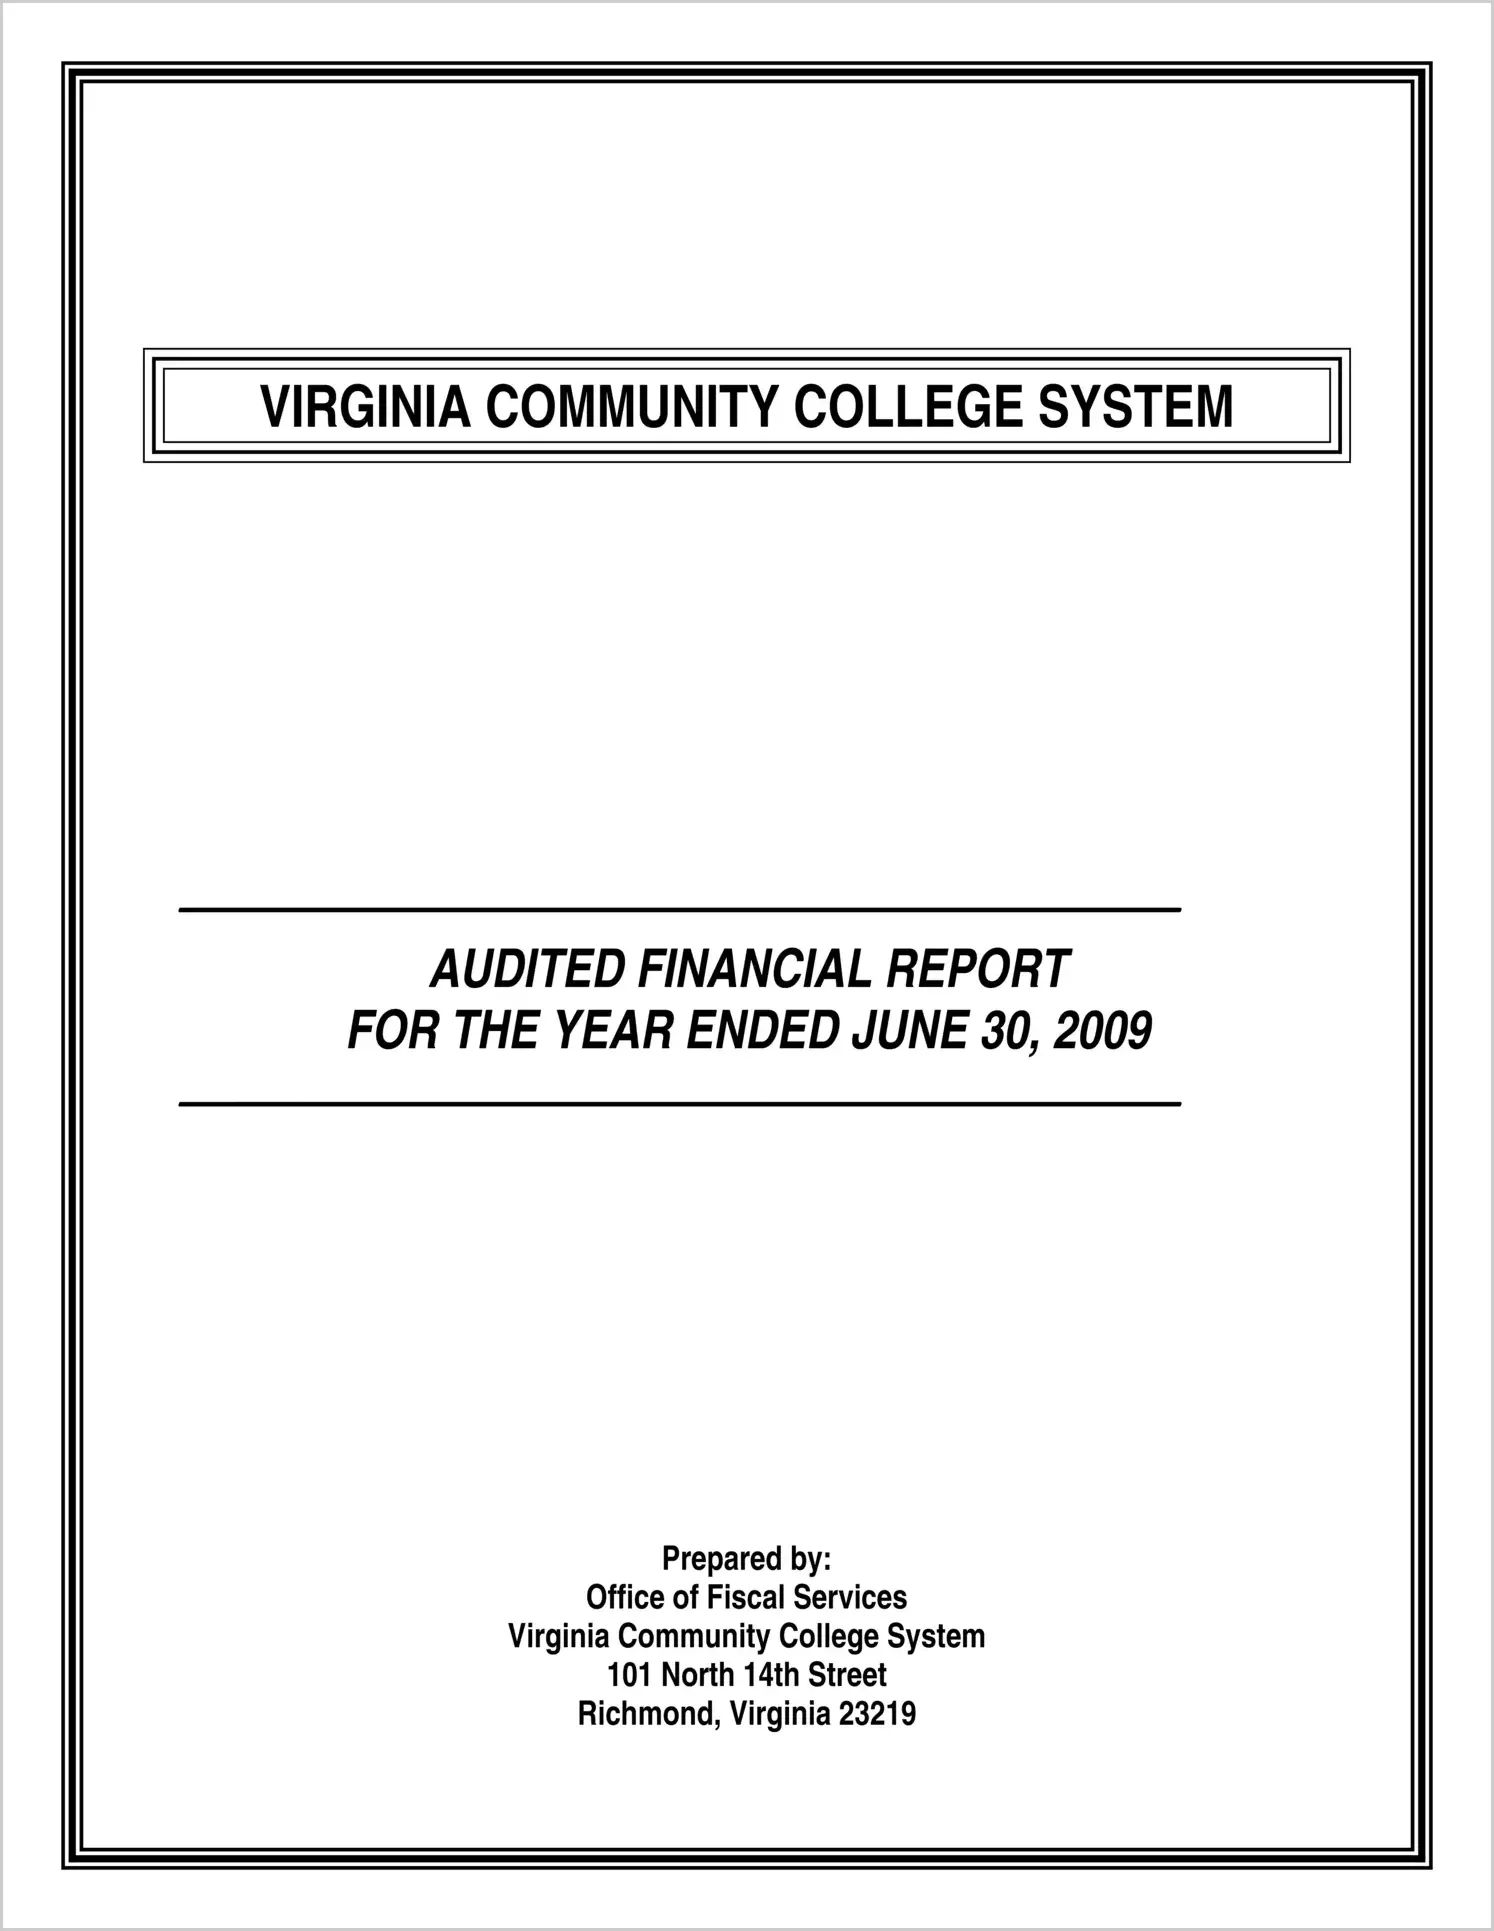 Virginia Community College System Financial Statement Opinion for the year ended June 30, 2009